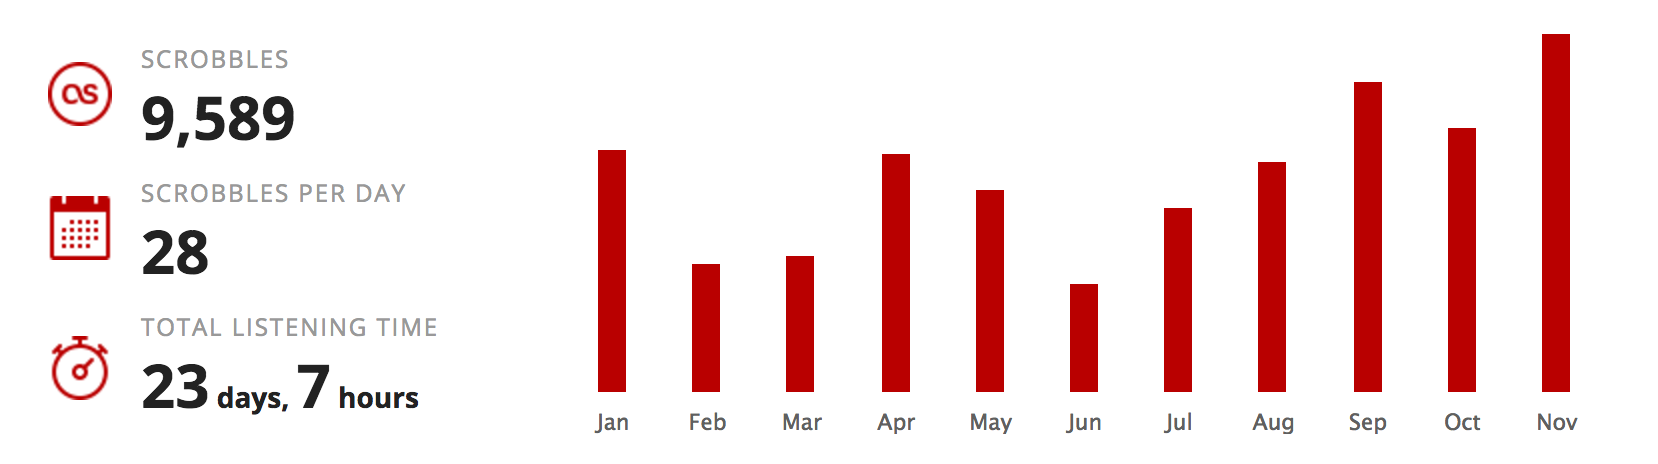 Last.fm charts showing listening activity for 2016, with 9589 total scrobbles, an average of 28 scrobbles per day, and a total listening time of 23 days and 7 hours. There’s also a column chart with no axes, showing generally low listening patterns in february, march, and june, with middling ones in may july and august, higher ones in january, april, and october, and the highest listening months of september and november.